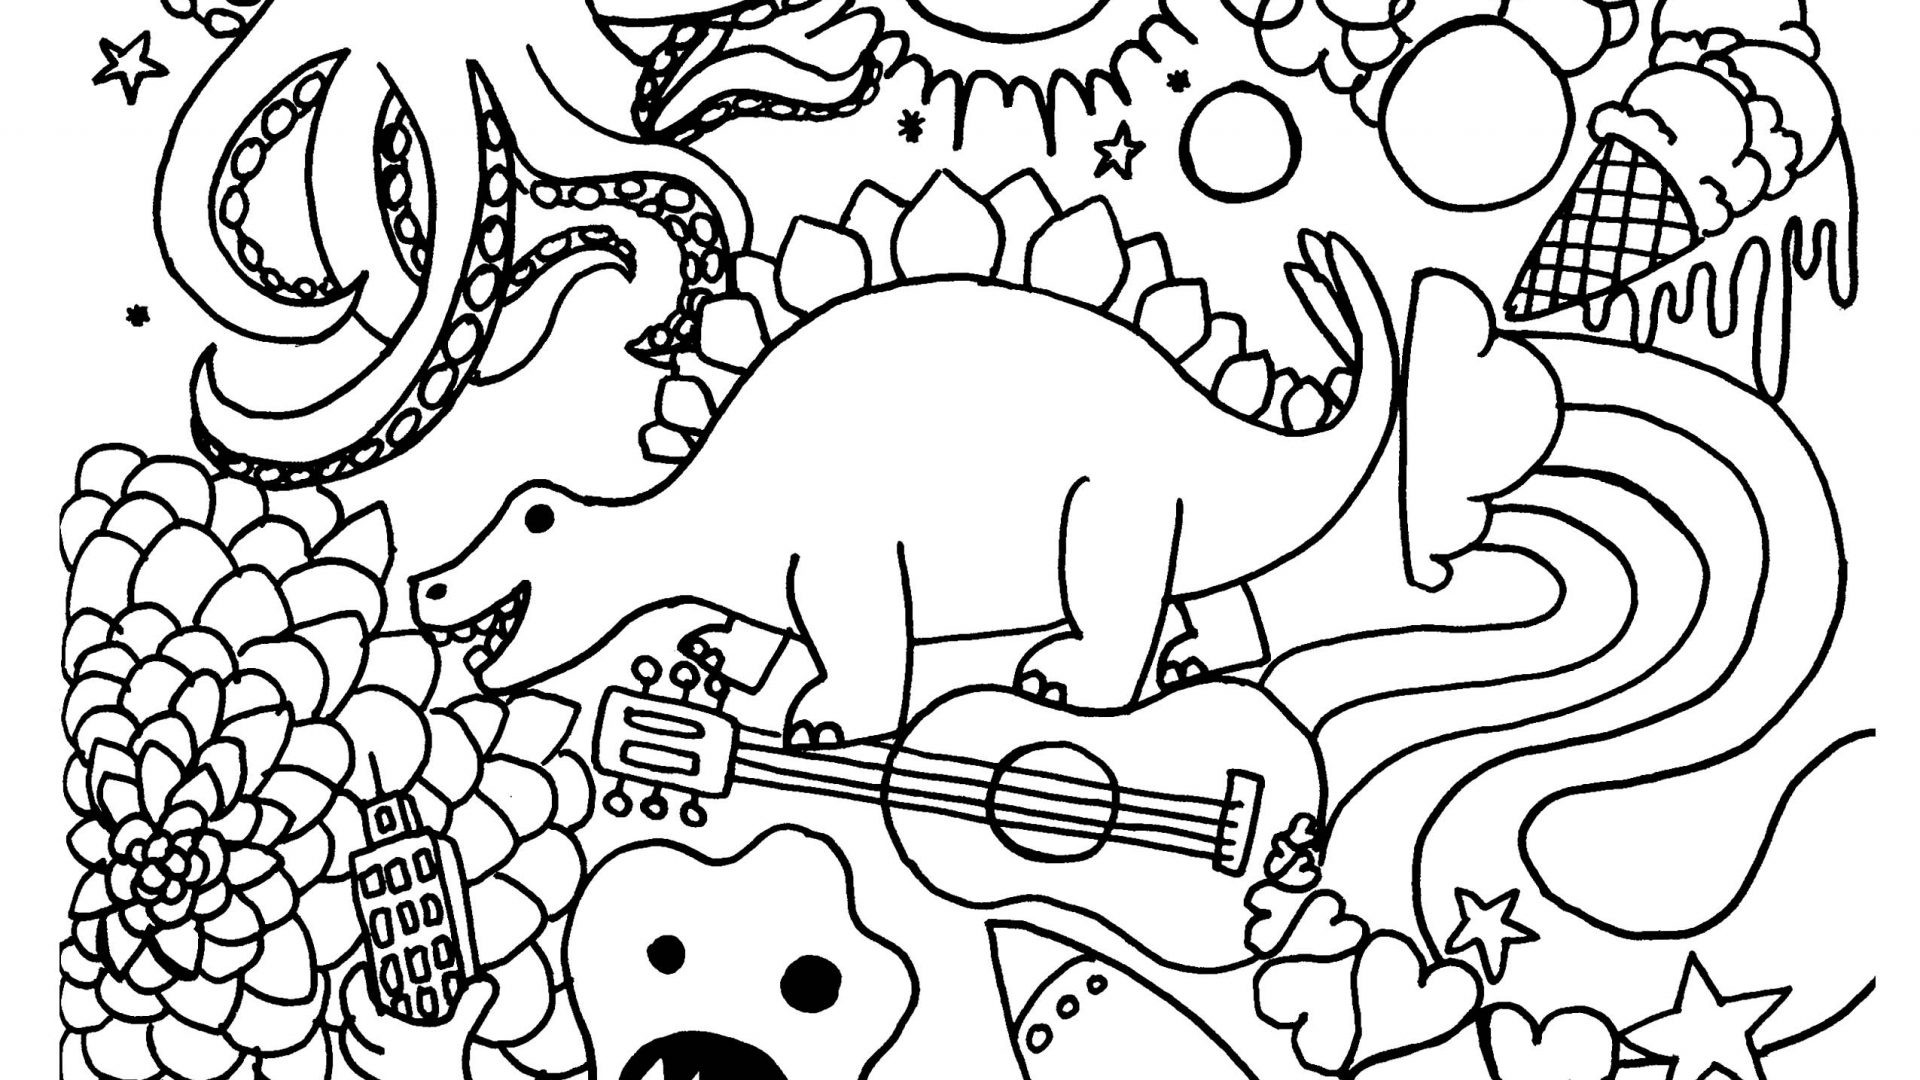 Coloring Pages For Grade 1 at GetDrawings.com | Free for personal use